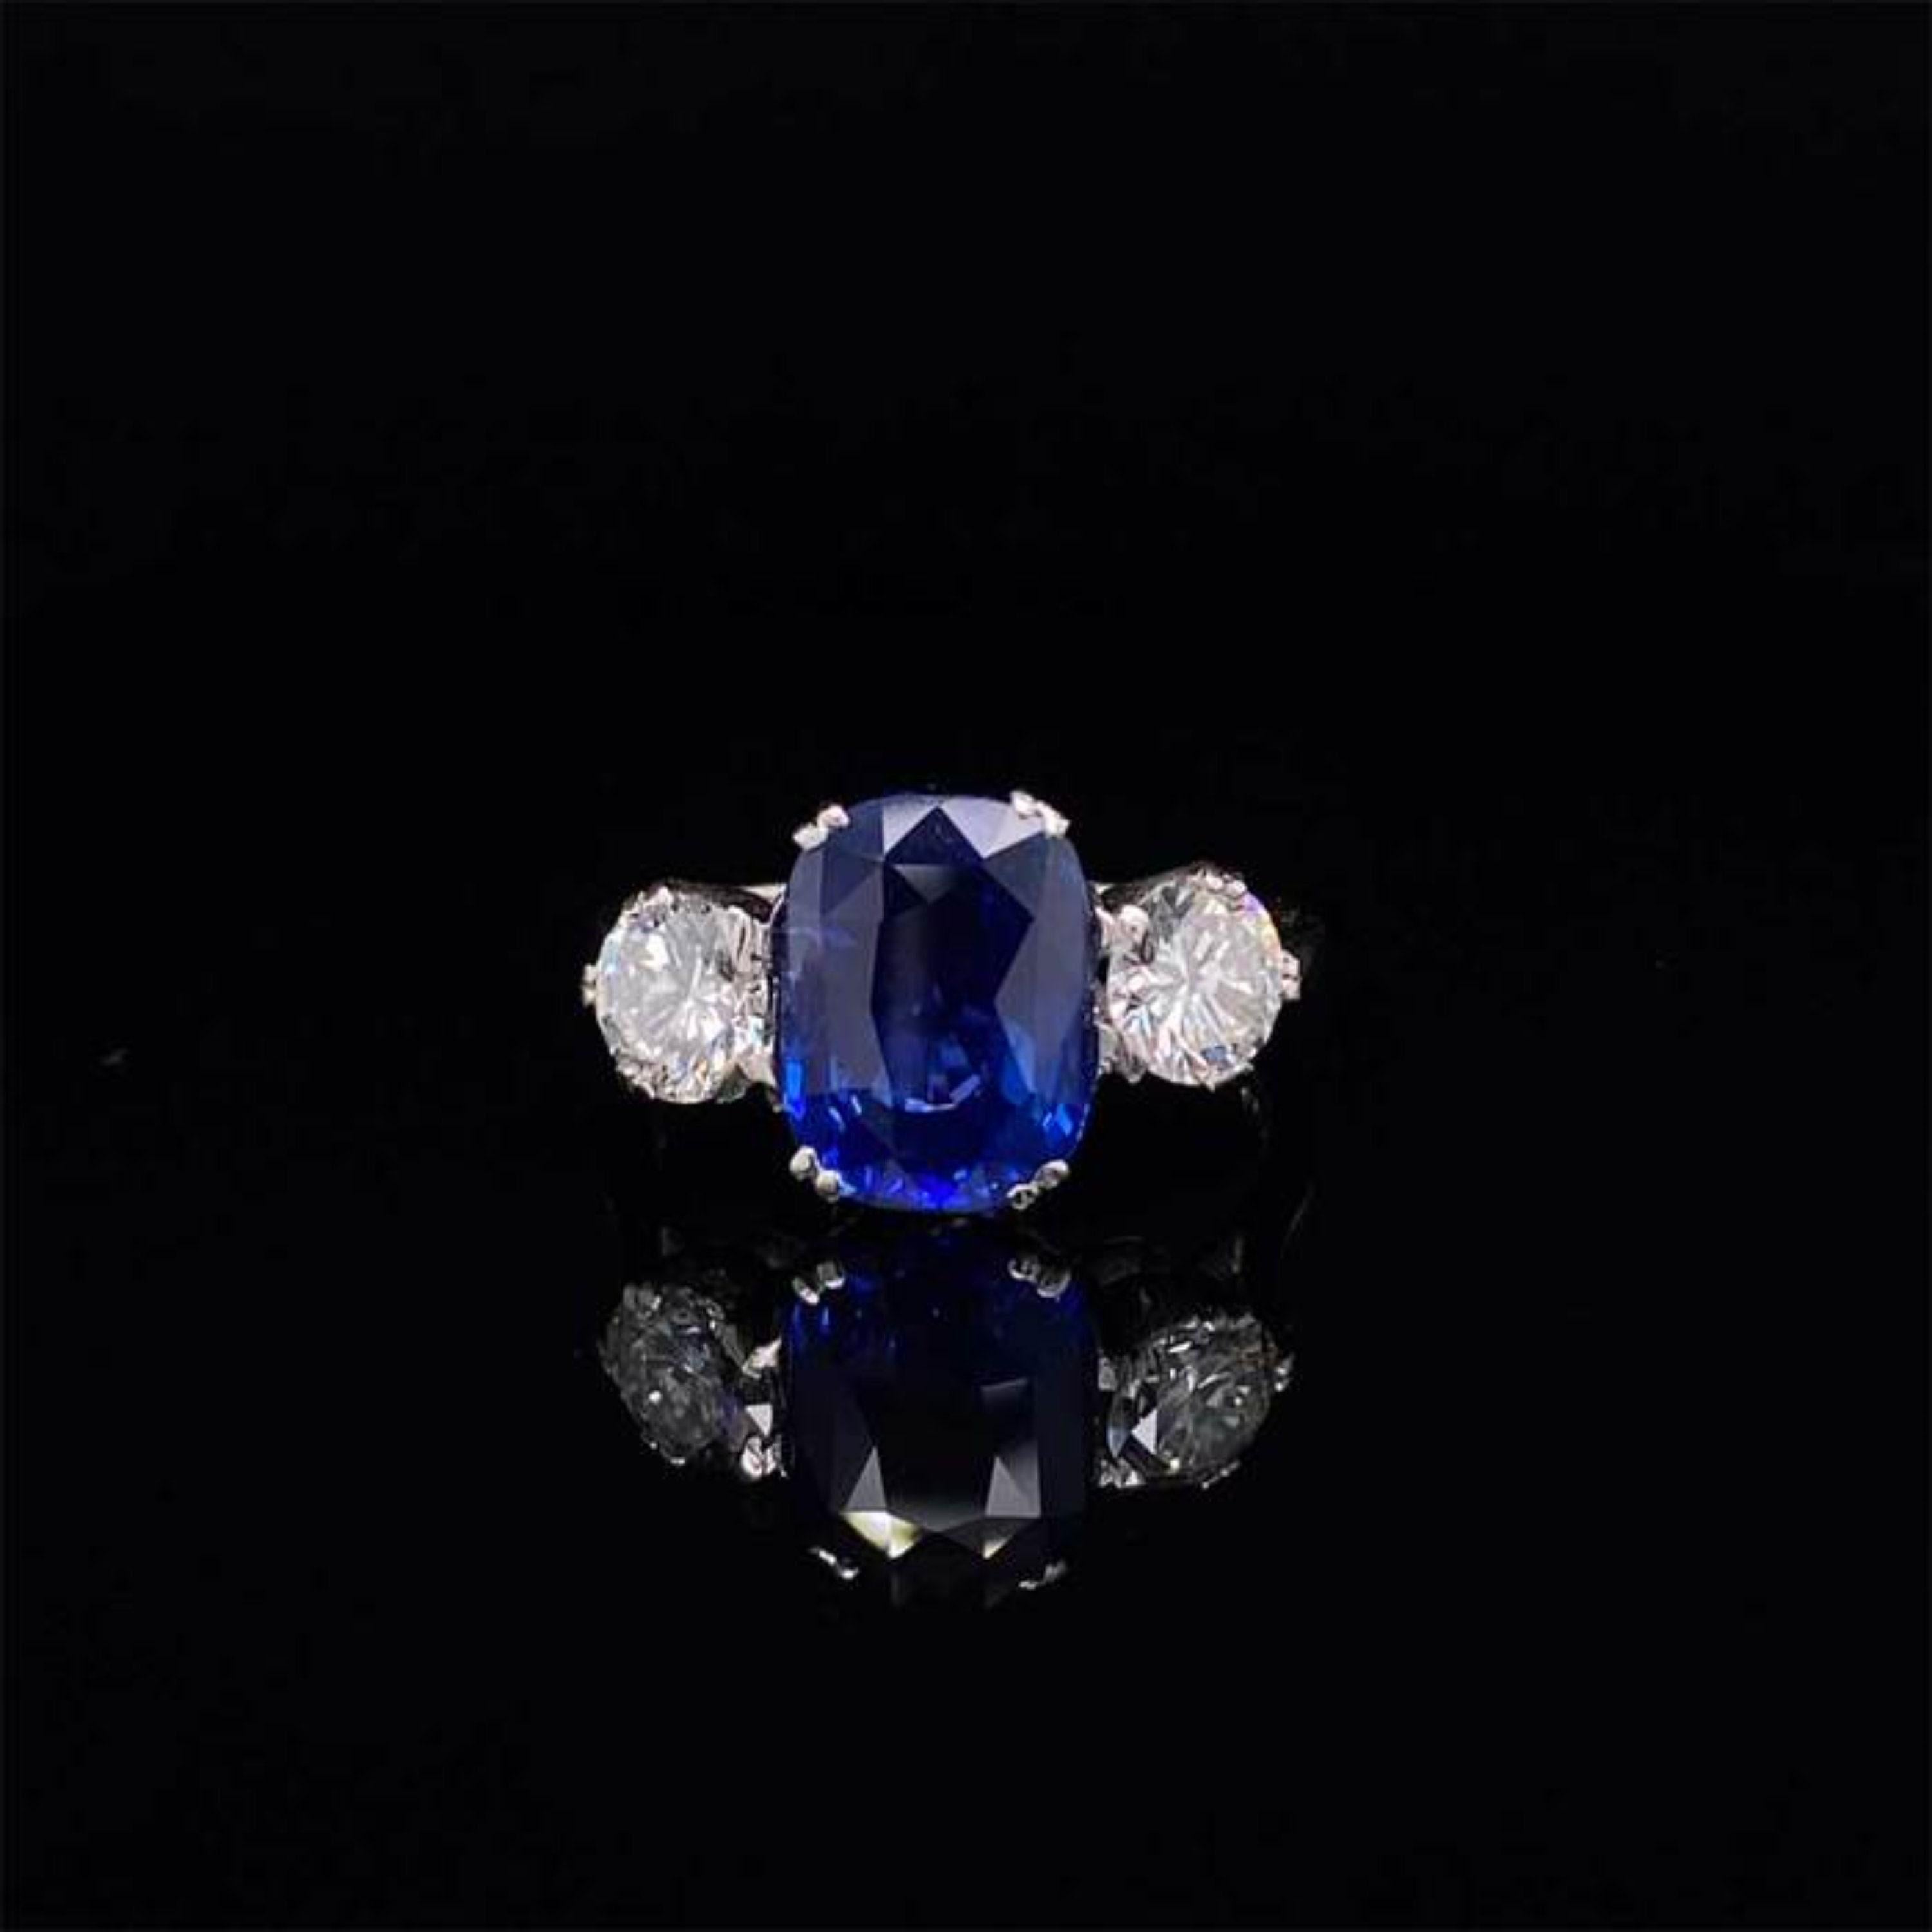 For Sale:  3 Carat Natural Sapphire Diamond Engagement Ring Set in 18K Gold, Cocktail Ring 2